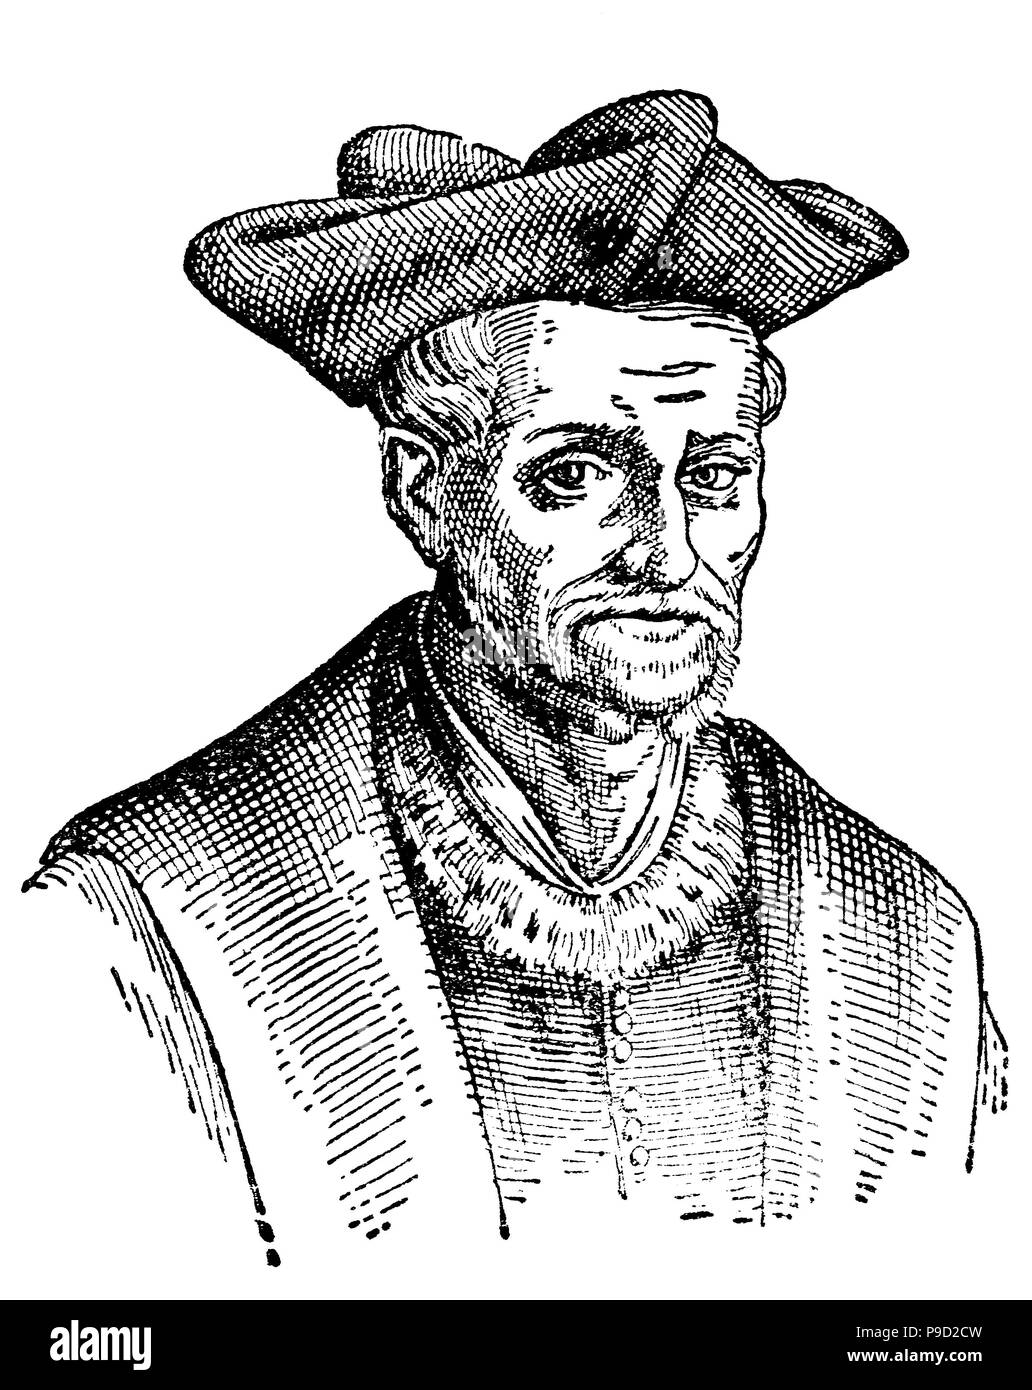 Francois Rabelais; between 1483 and 1494 â€“ 9 April 1553 was a French Renaissance writer, physician, Renaissance humanist, monk and Greek scholar, digital improved reproduction of an original print from the year 1900 Stock Photo